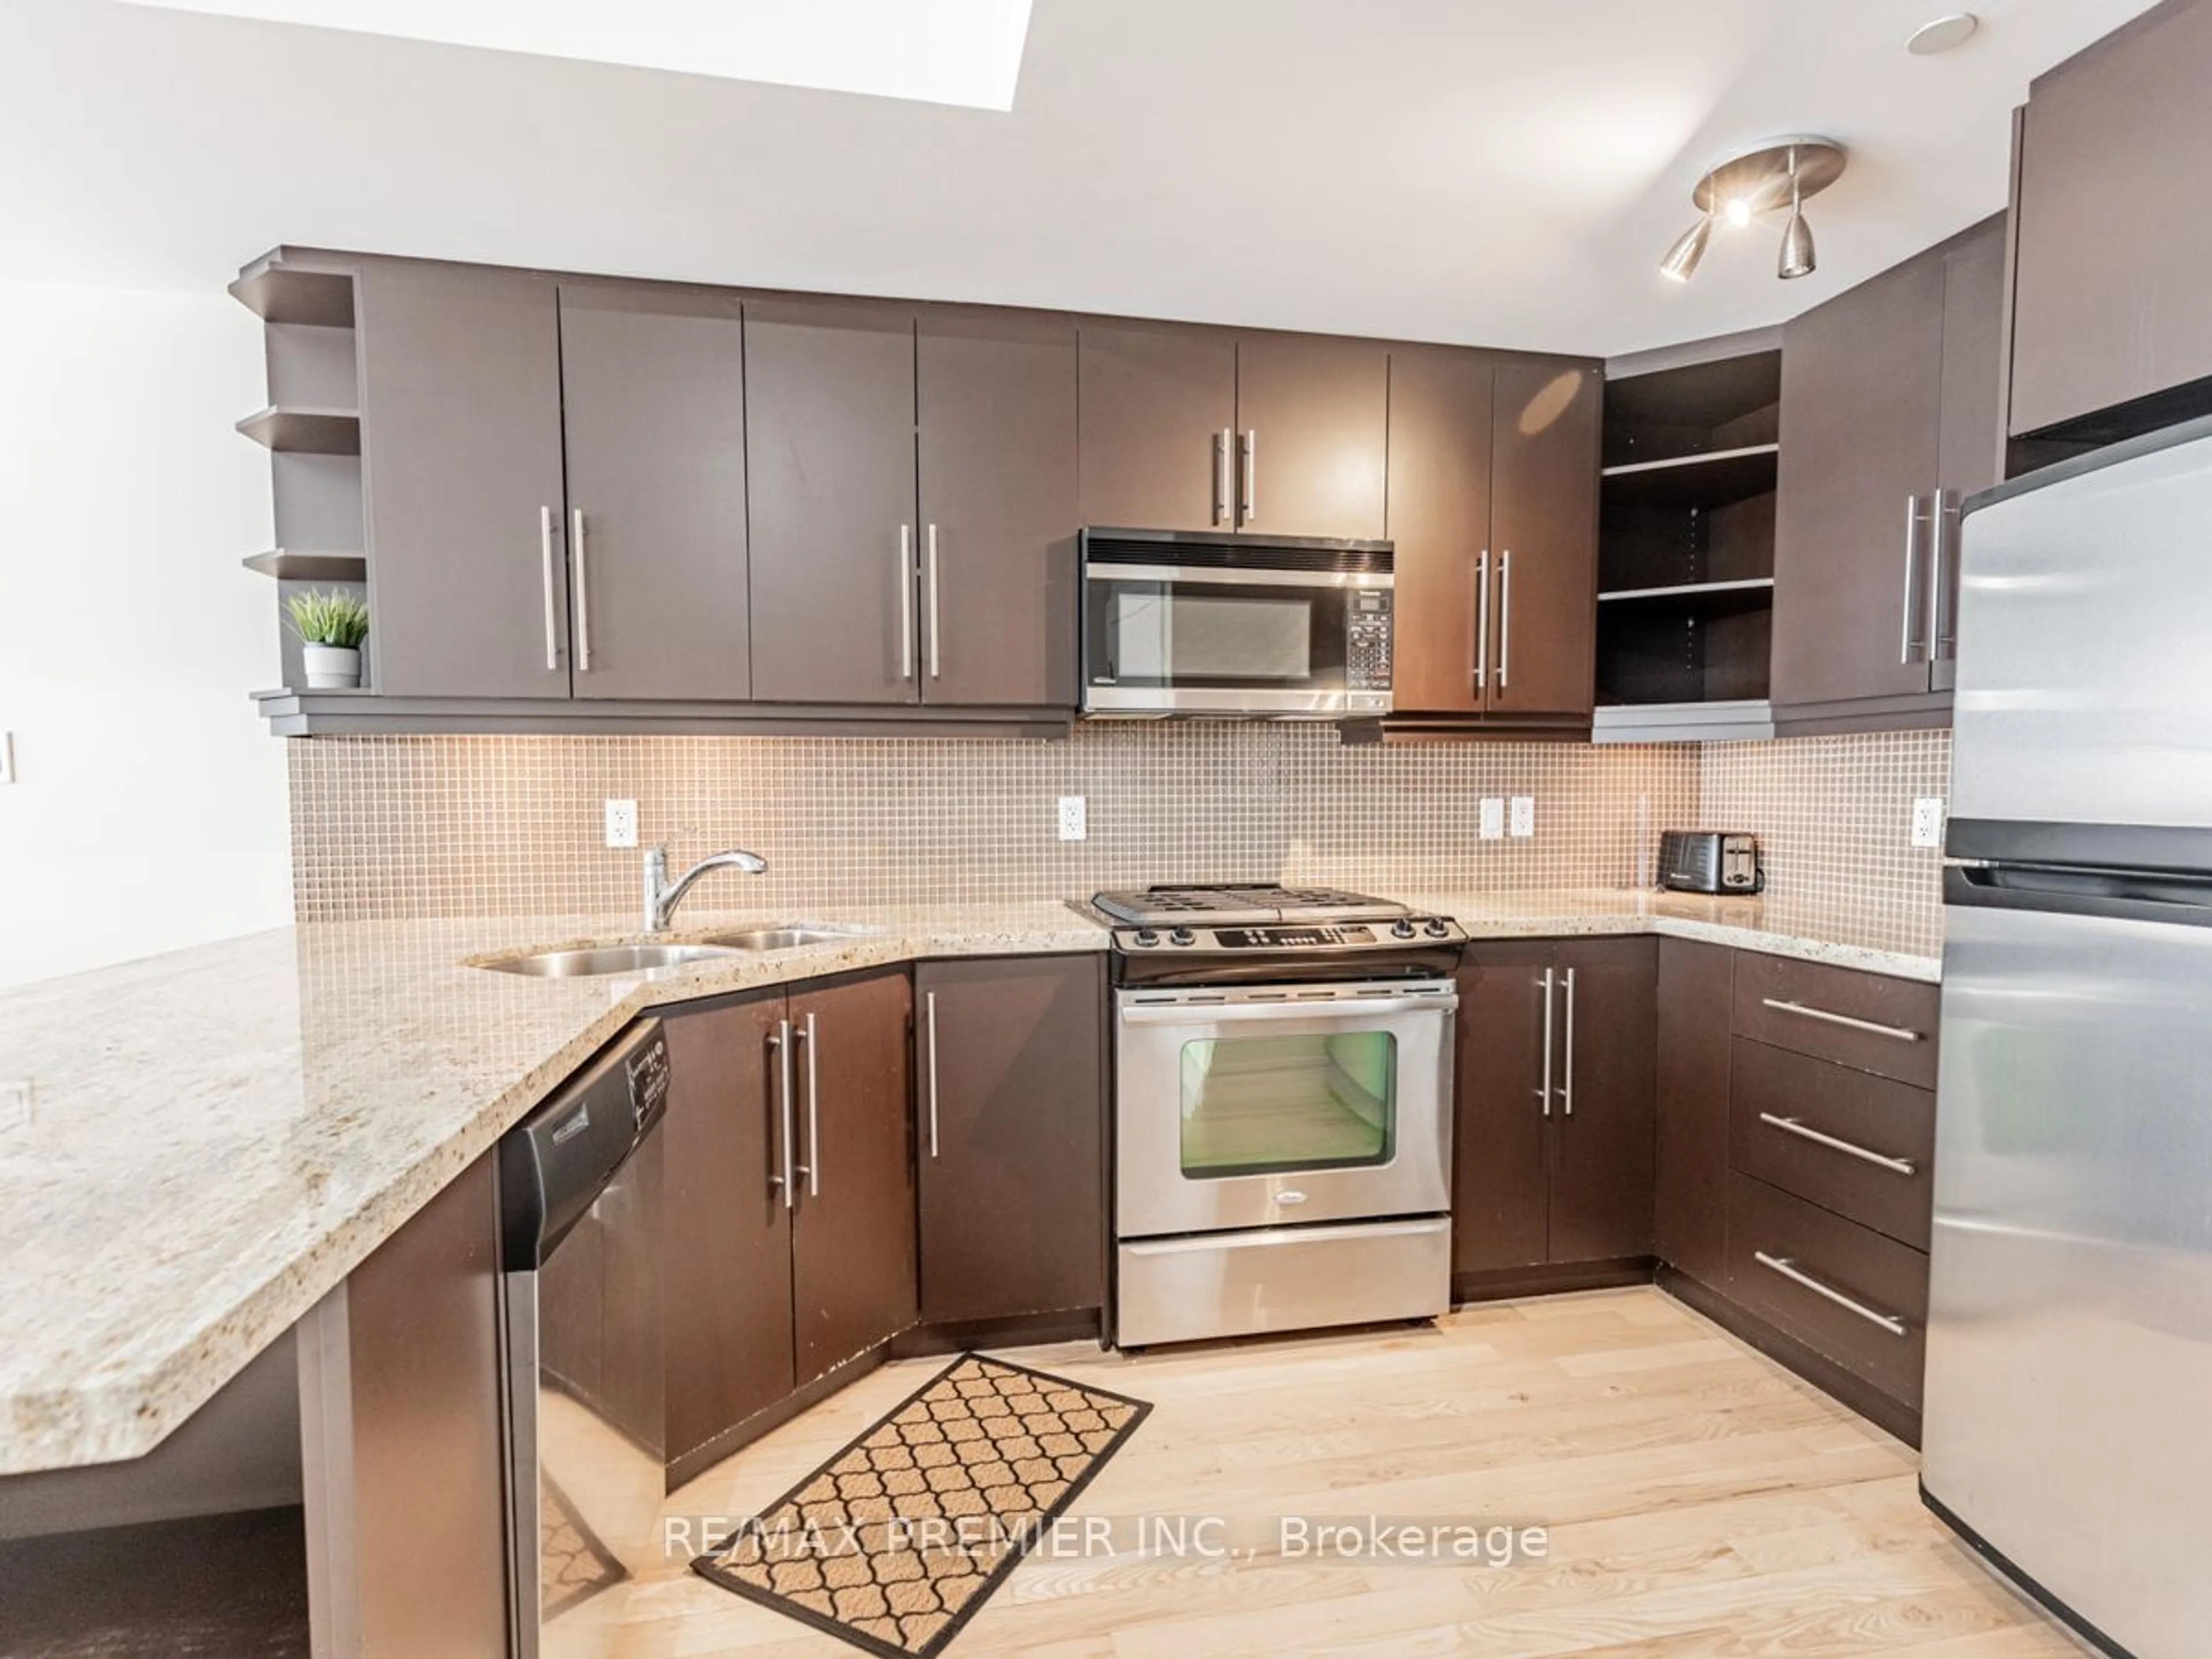 Contemporary kitchen for 473 Dupont St #5, Toronto Ontario M6G 1Y6